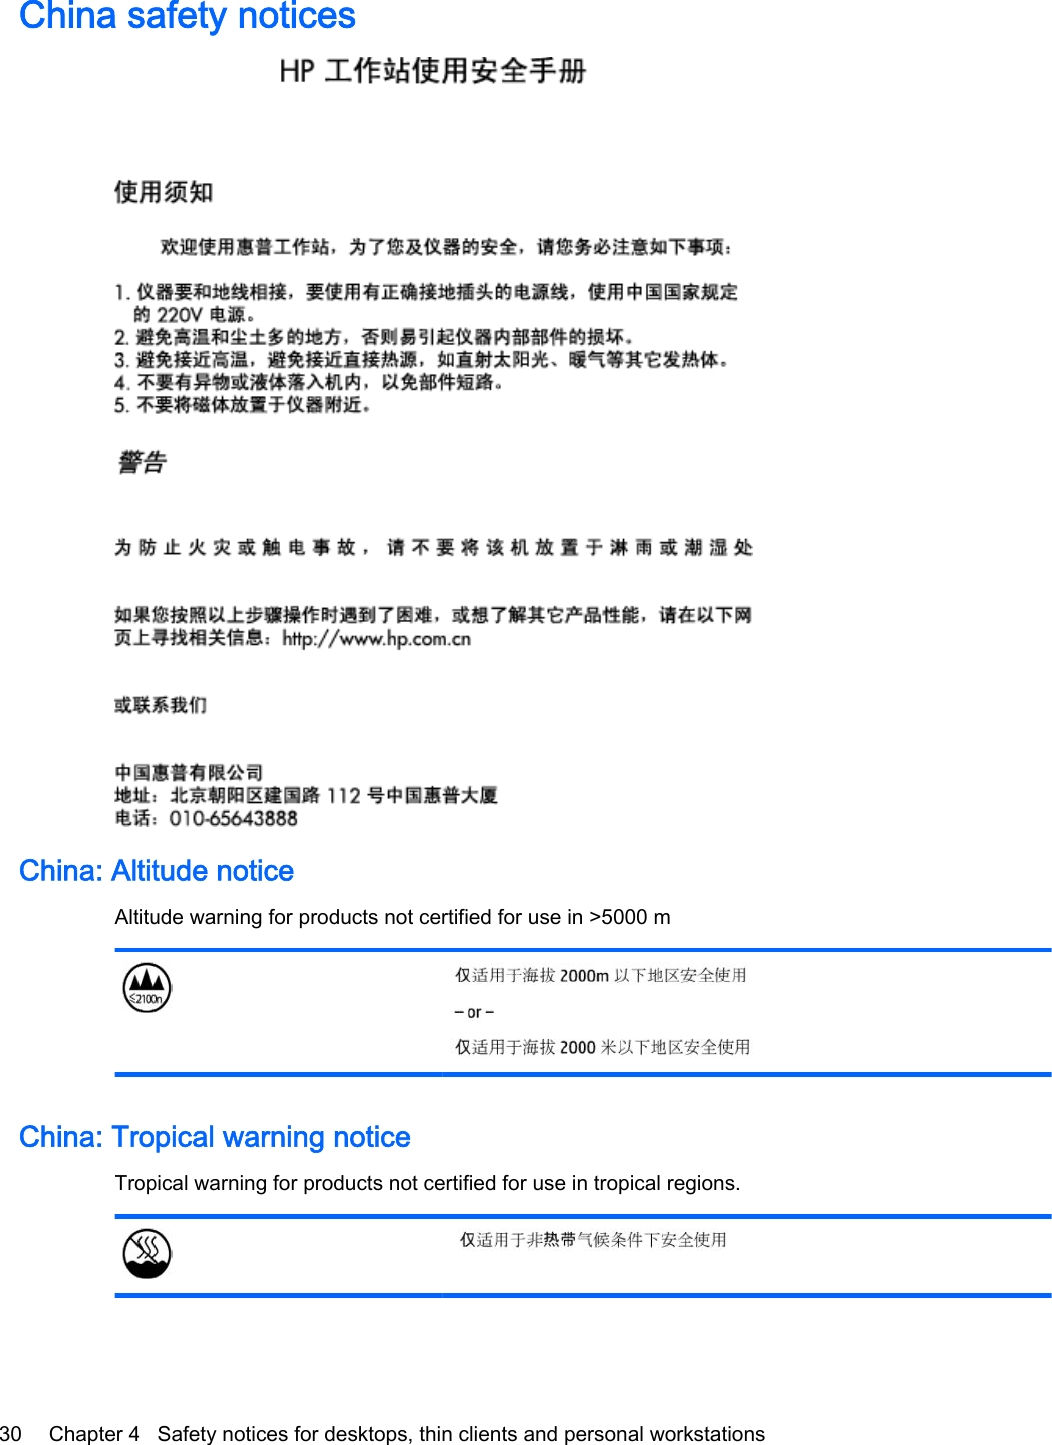 China safety noticesChina: Altitude noticeAltitude warning for products not certified for use in &gt;5000 mChina: Tropical warning noticeTropical warning for products not certified for use in tropical regions.30 Chapter 4   Safety notices for desktops, thin clients and personal workstations